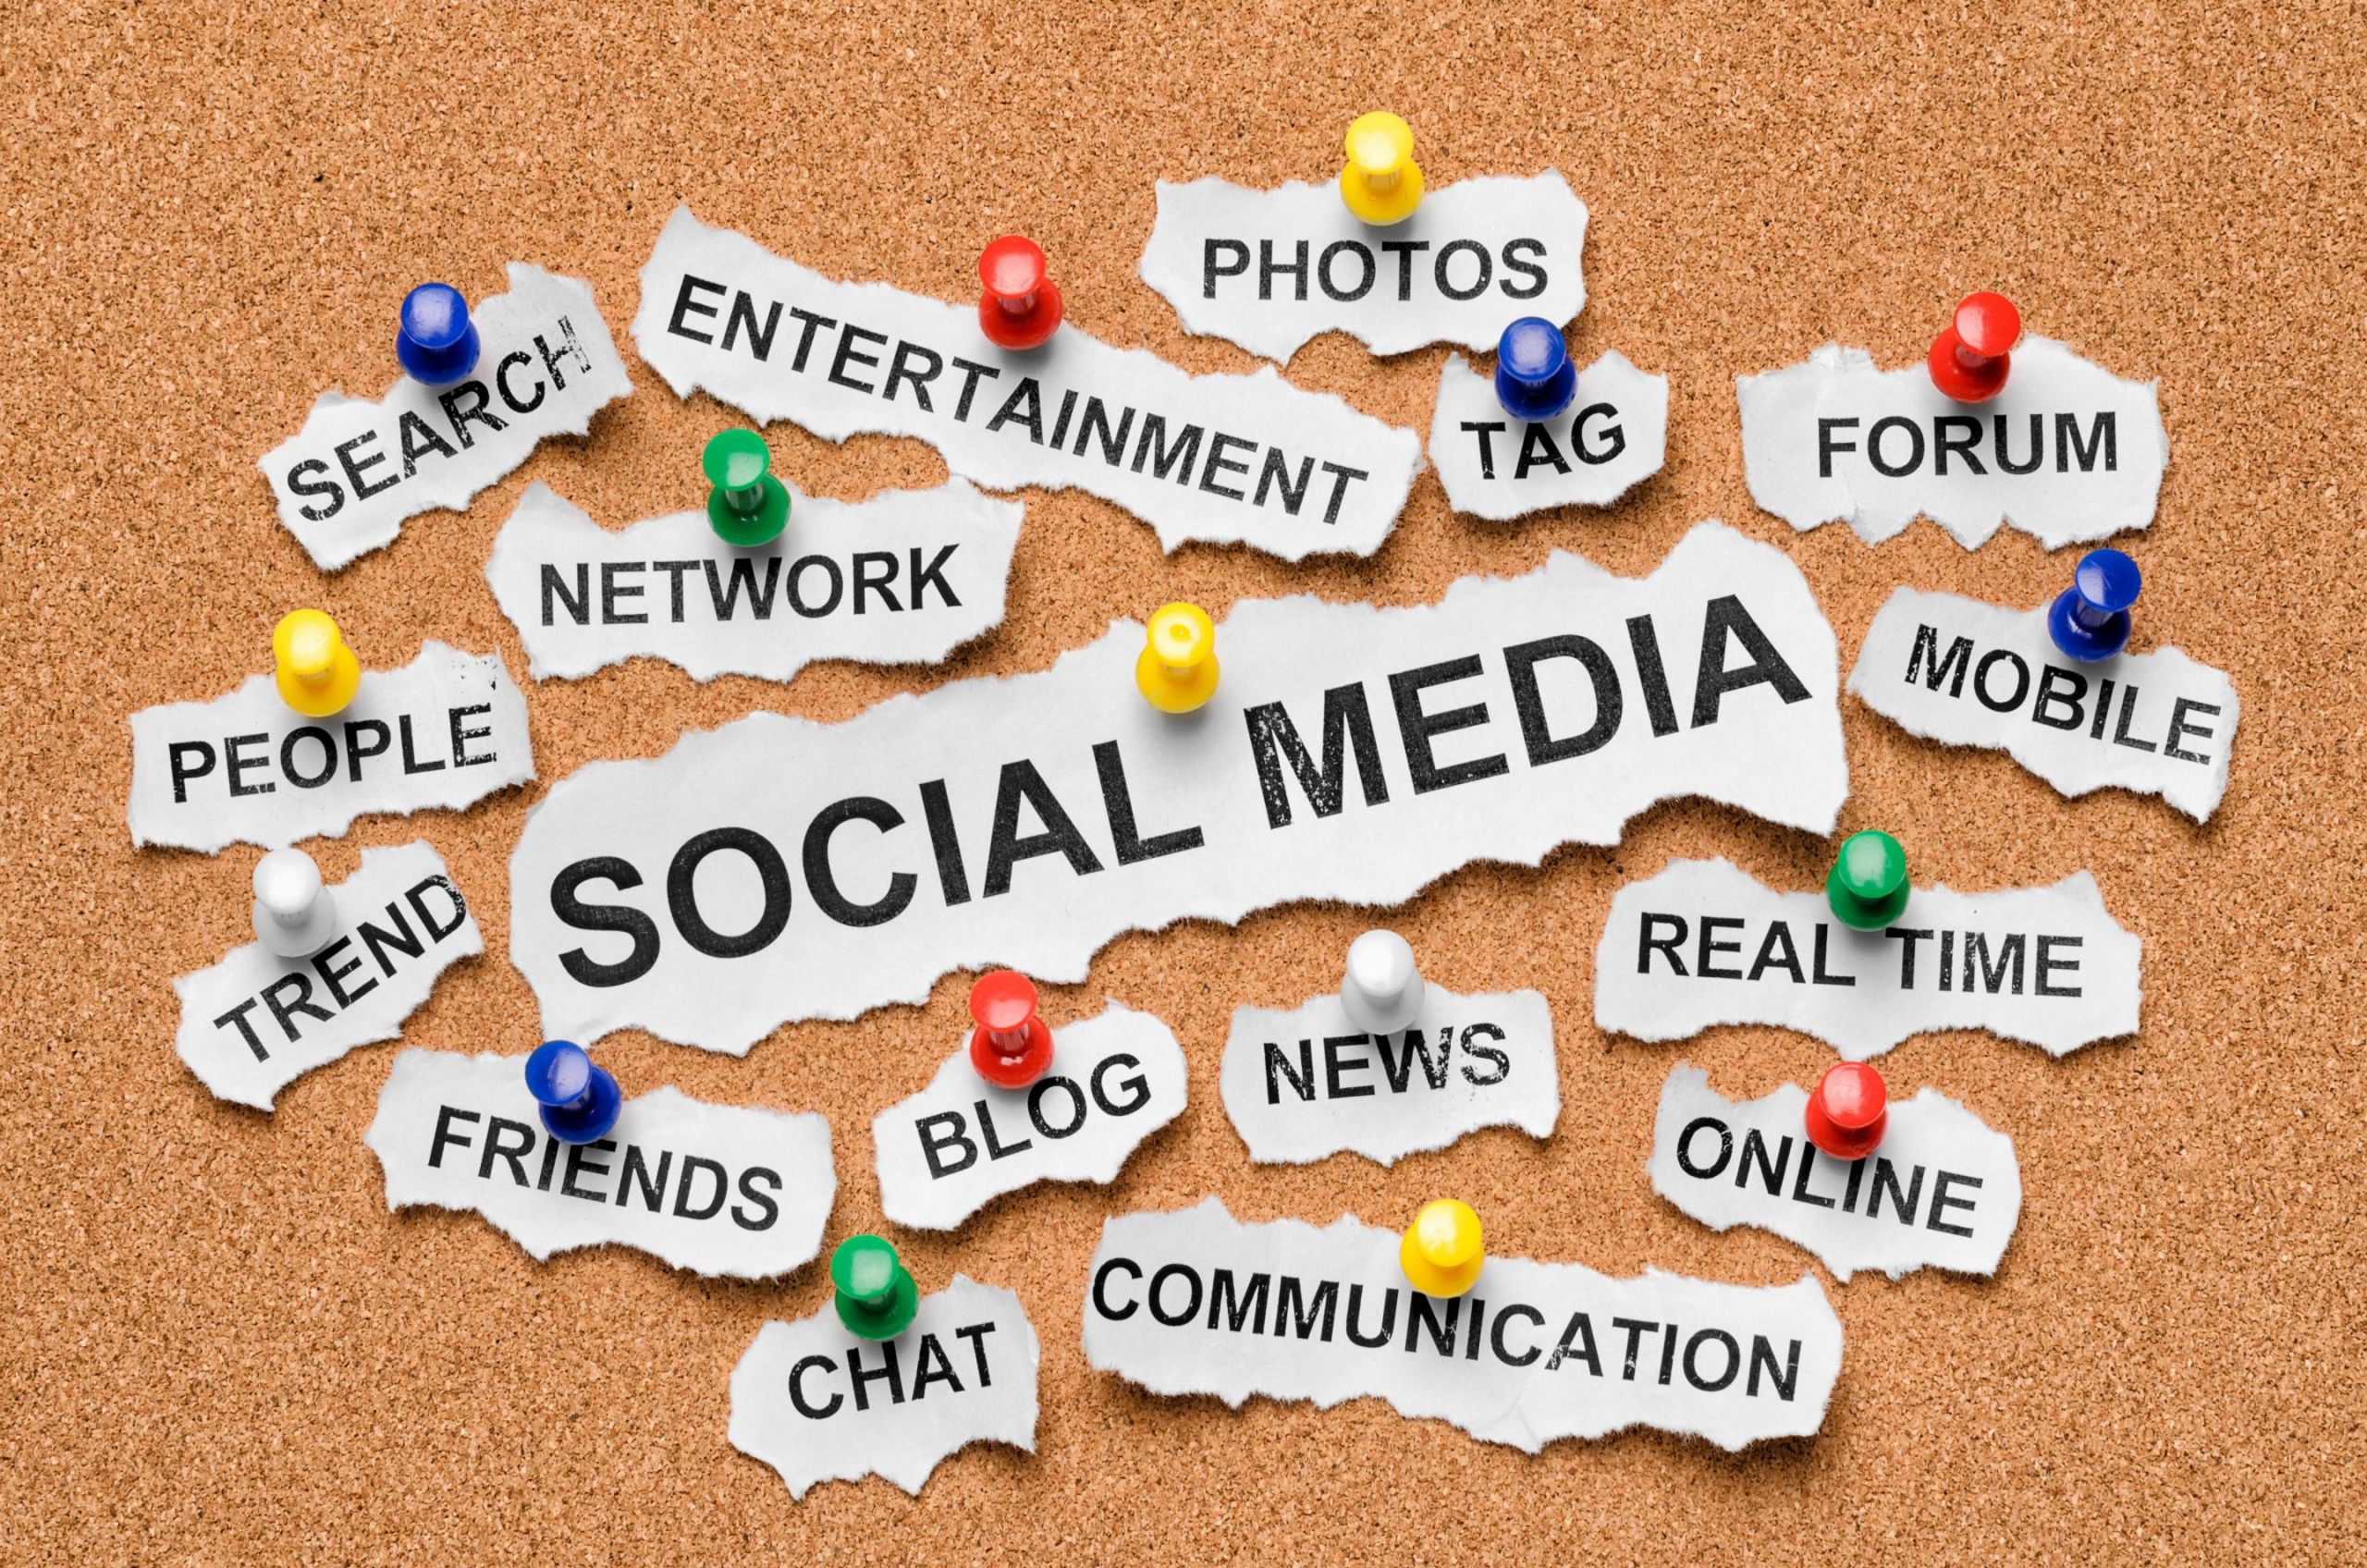 Digital marketing the need of the hour, importance of social media